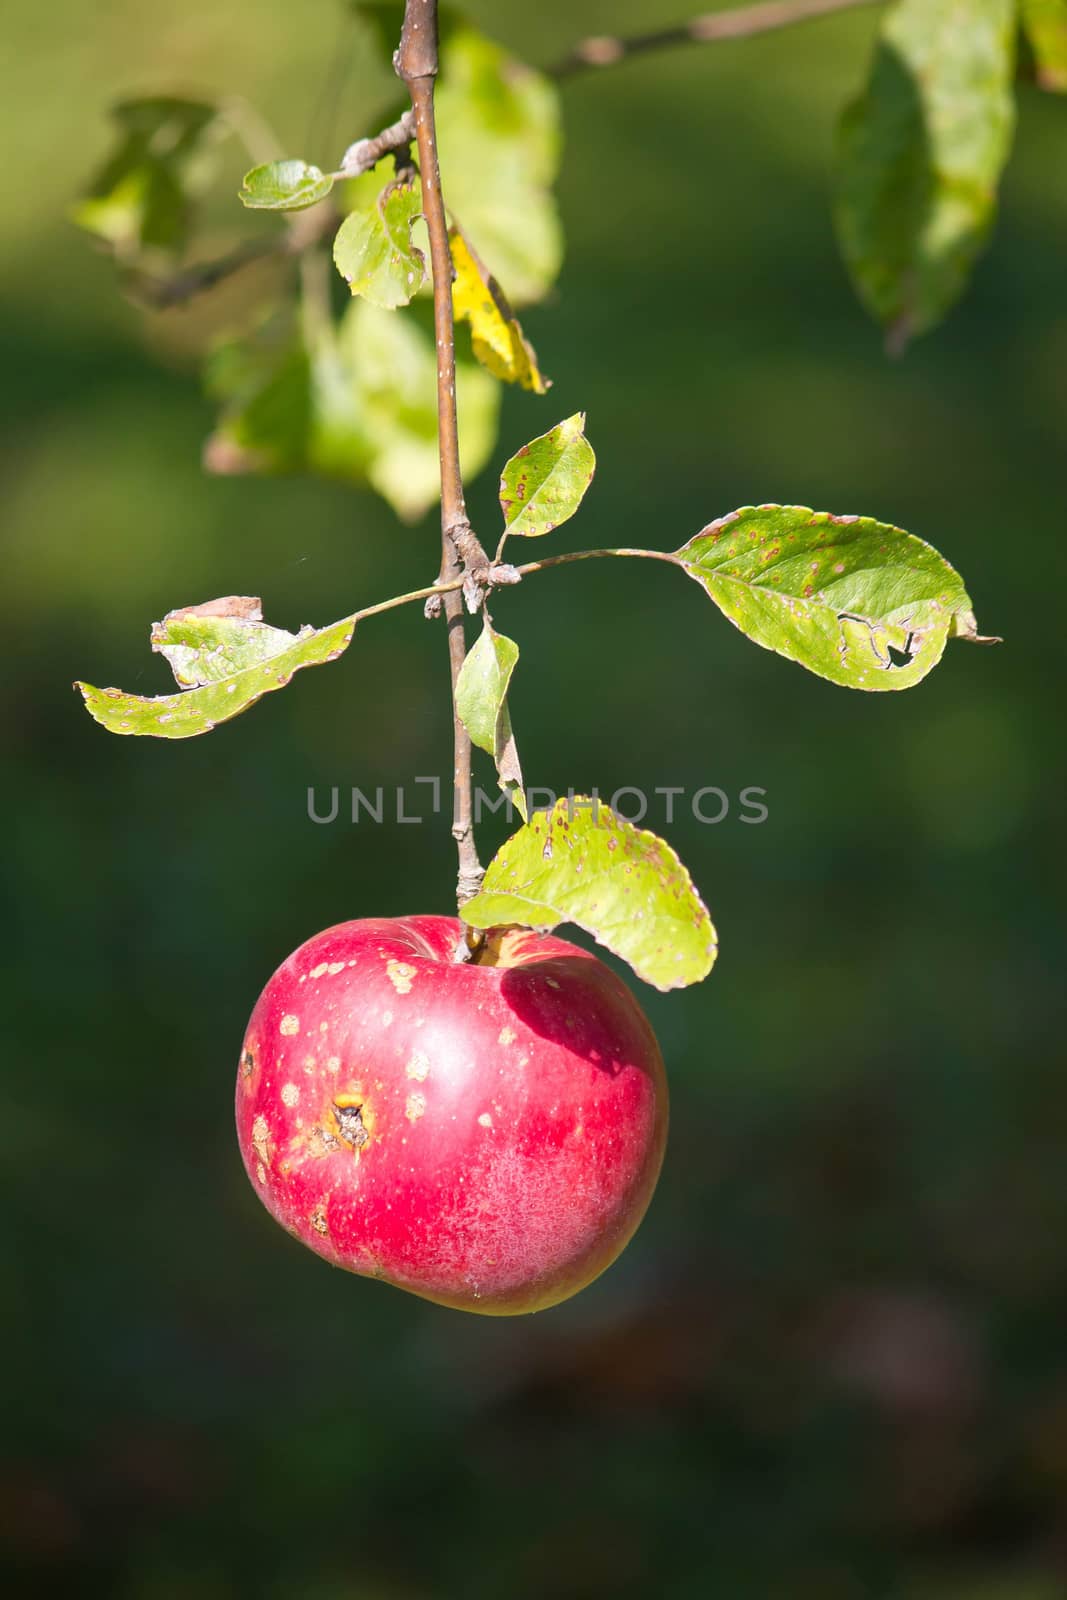 Single red apple on tree, vertical view